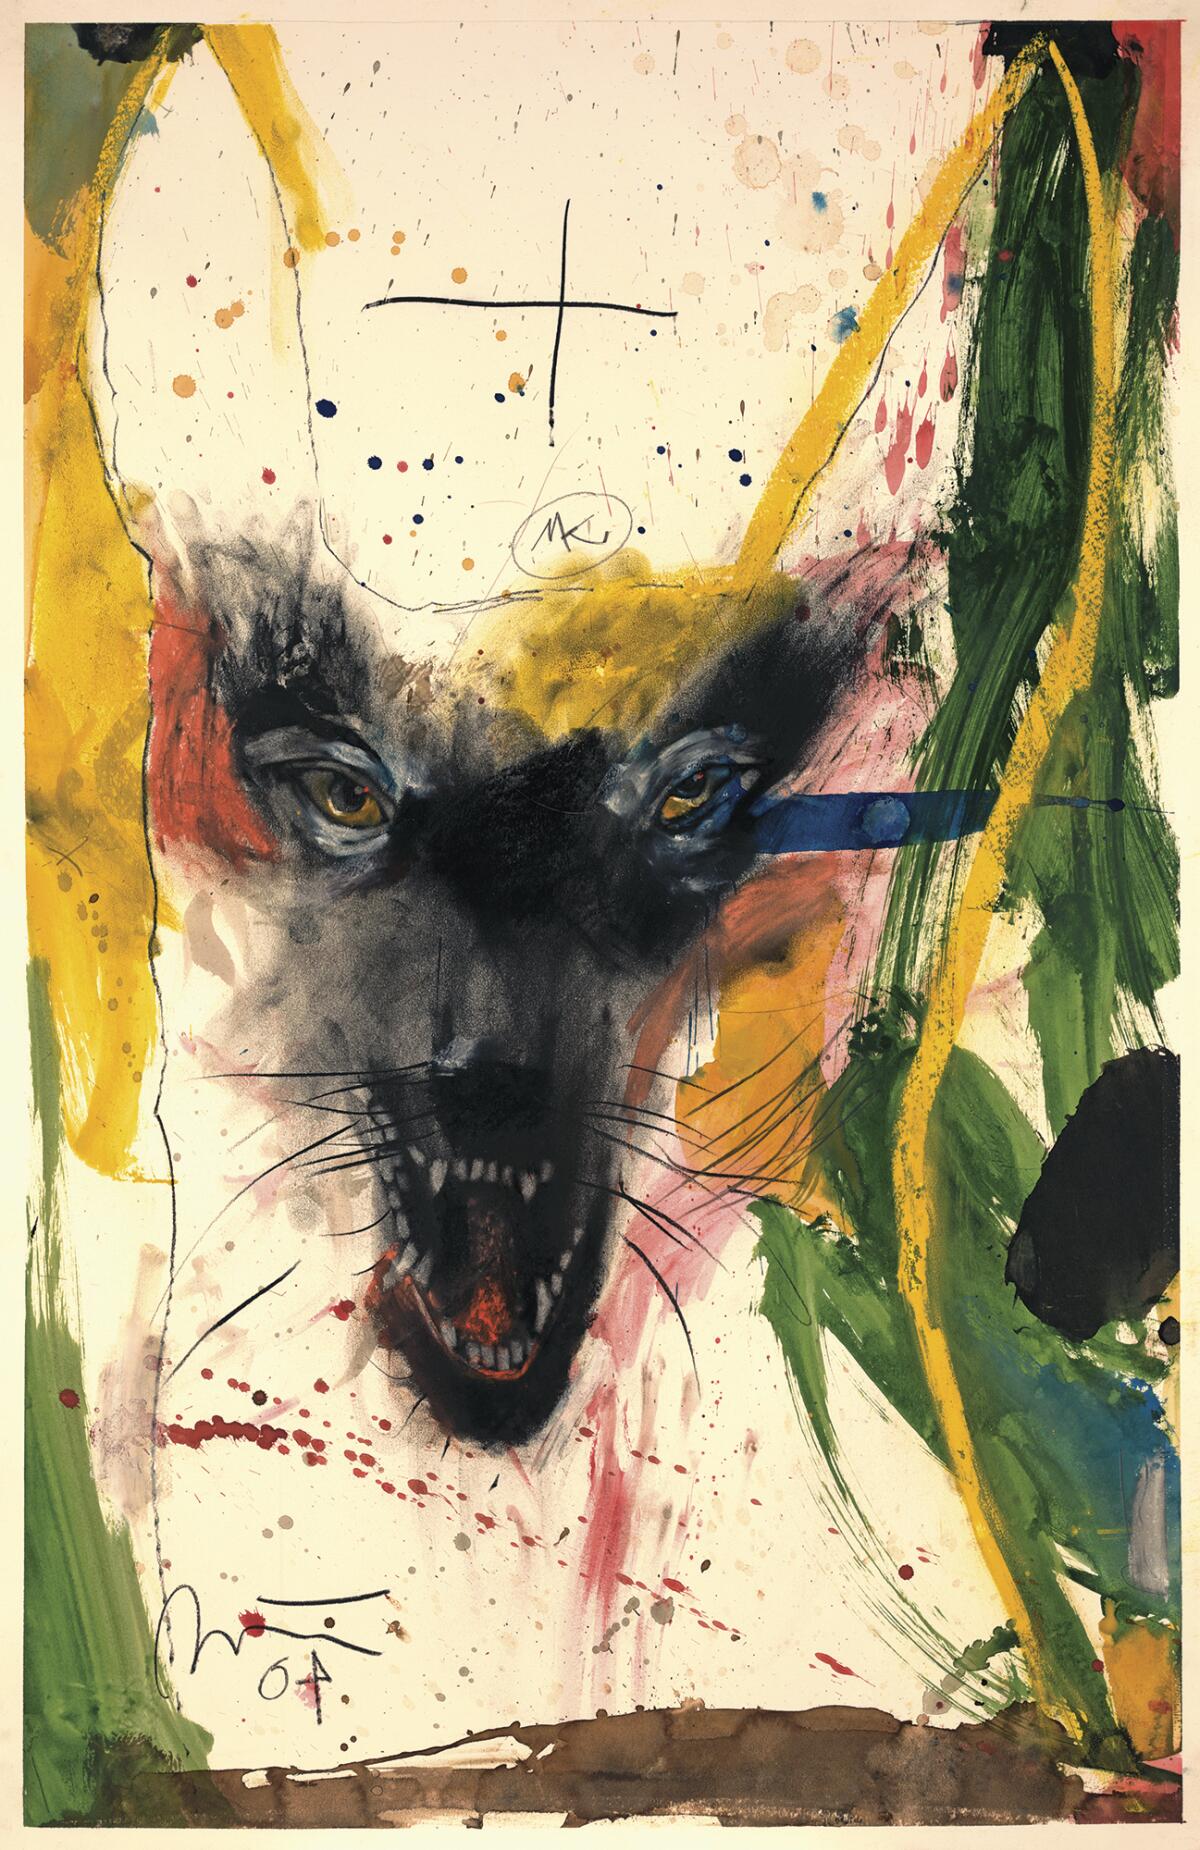 A stormy painting shows the dark face of a canine amid tumultuous splashes of color